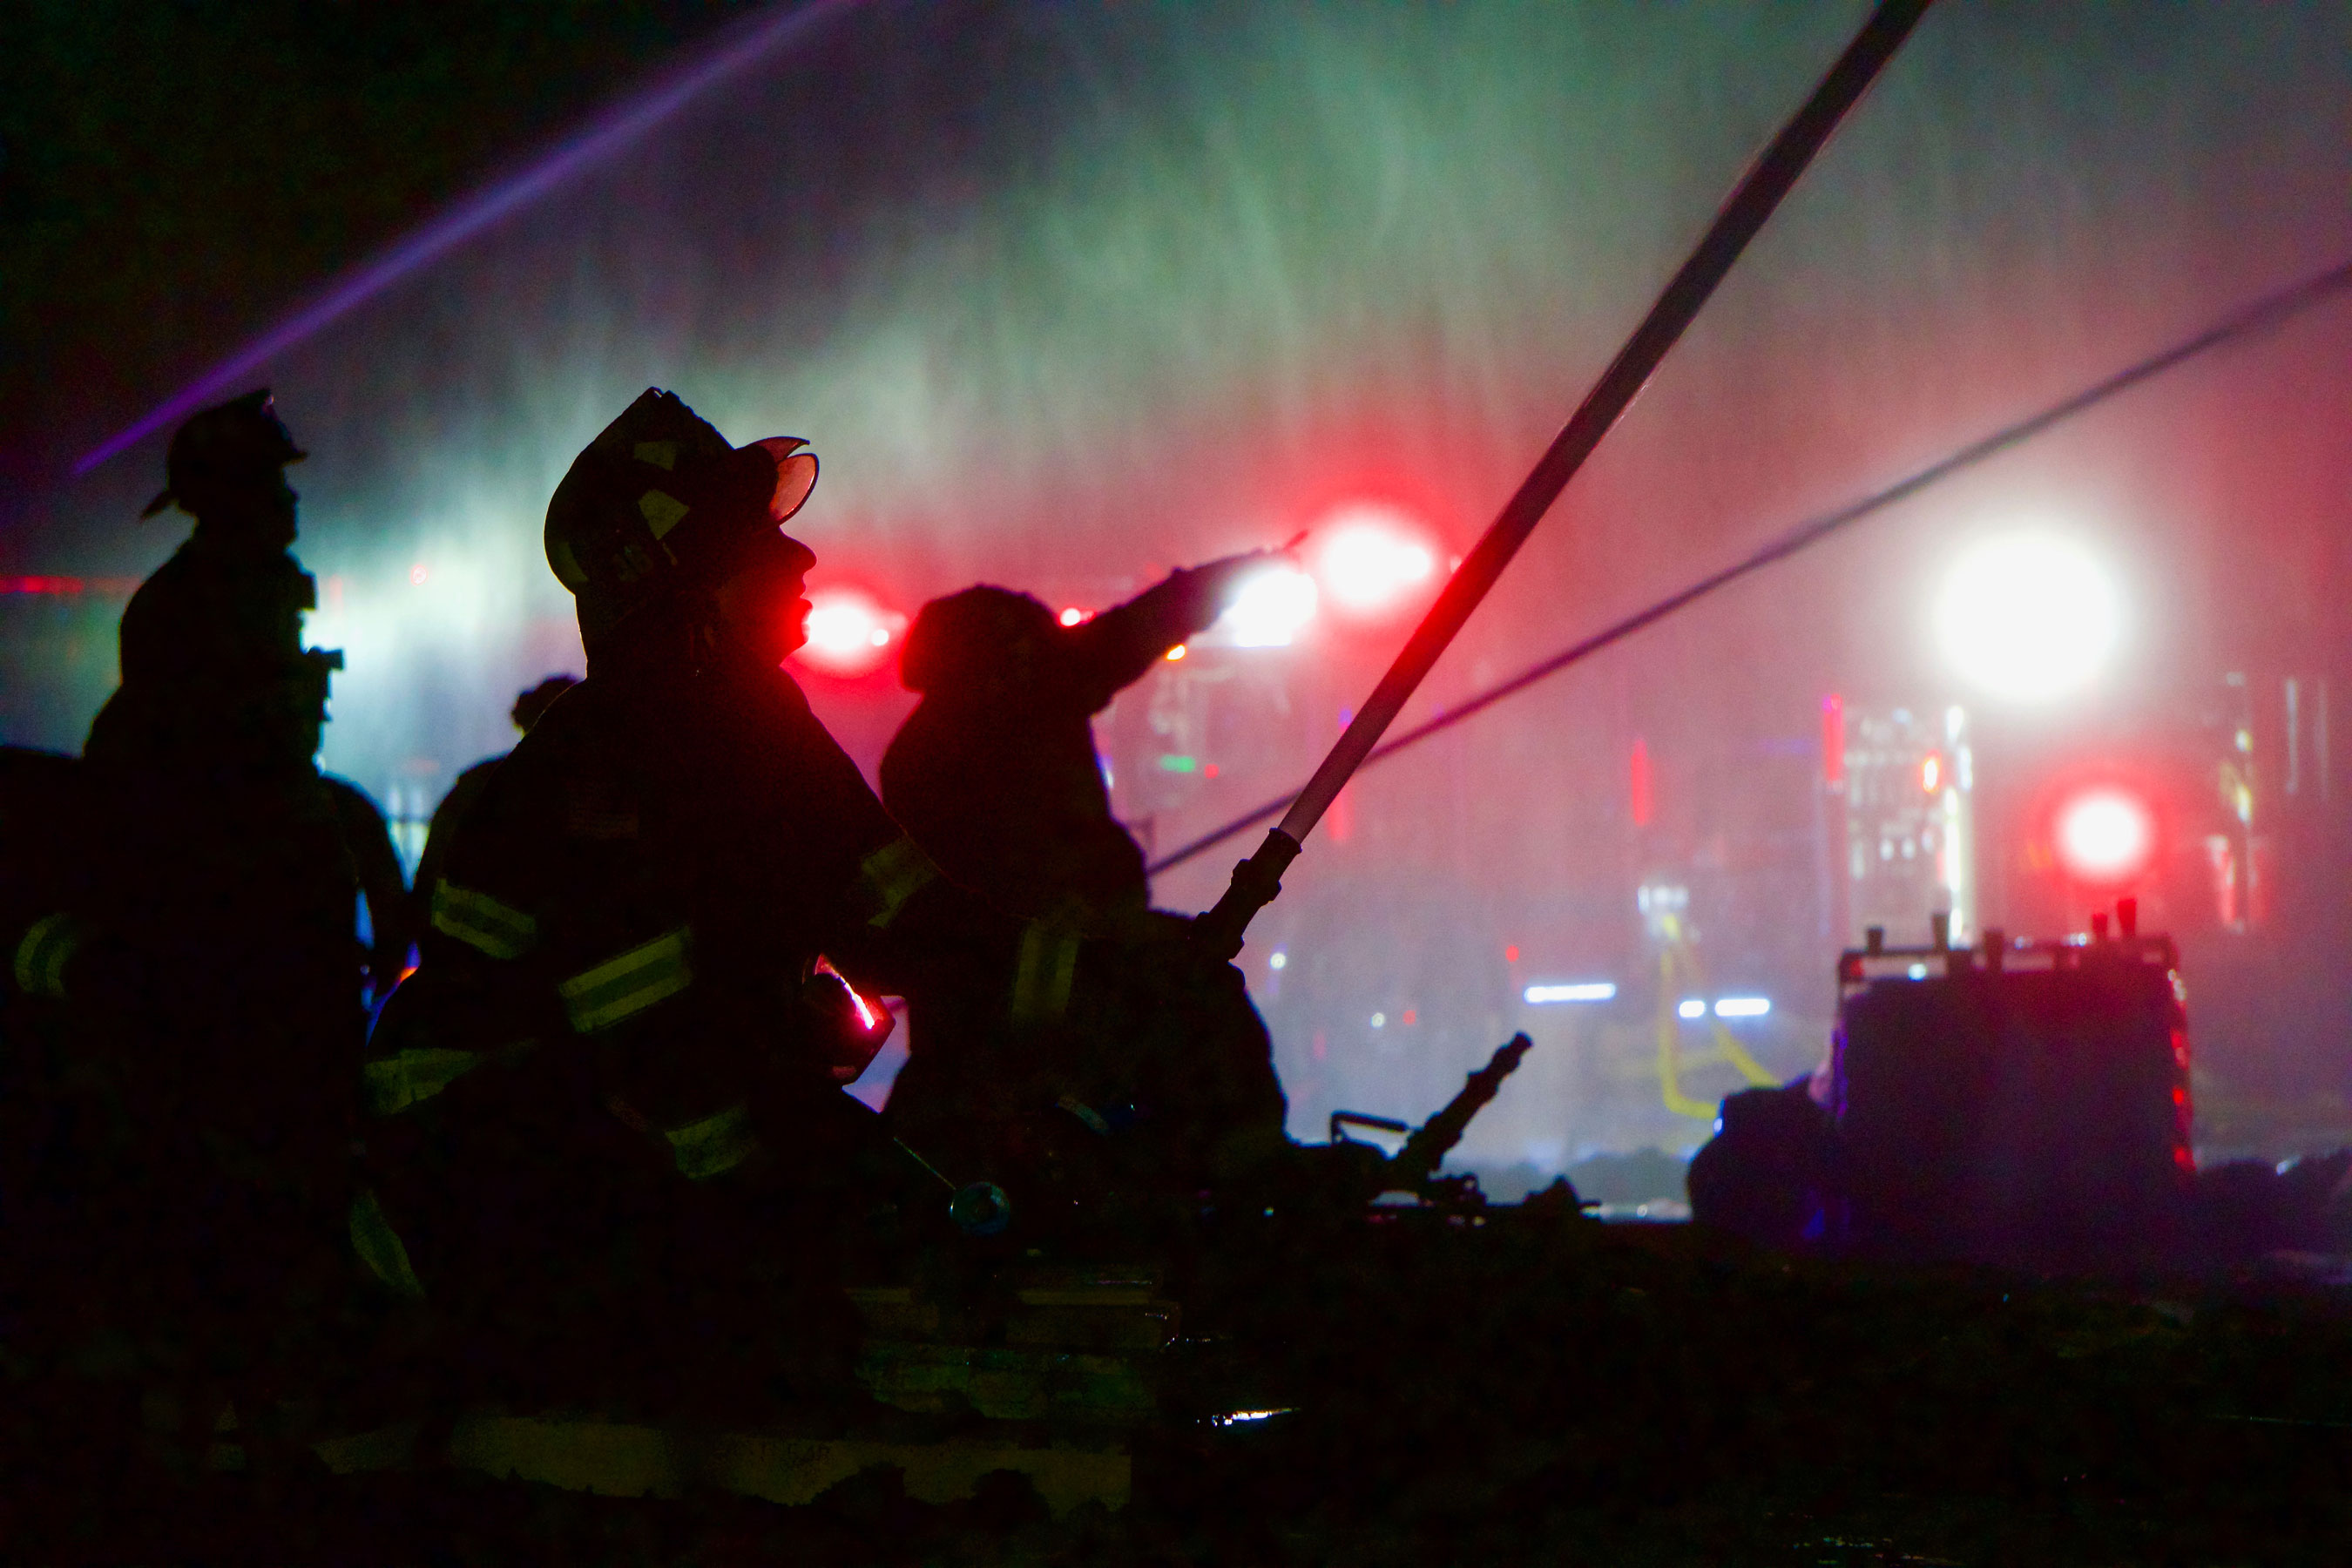 Silhouette of three firefighters and hose jets fighting fire at night with fire engine lights in background